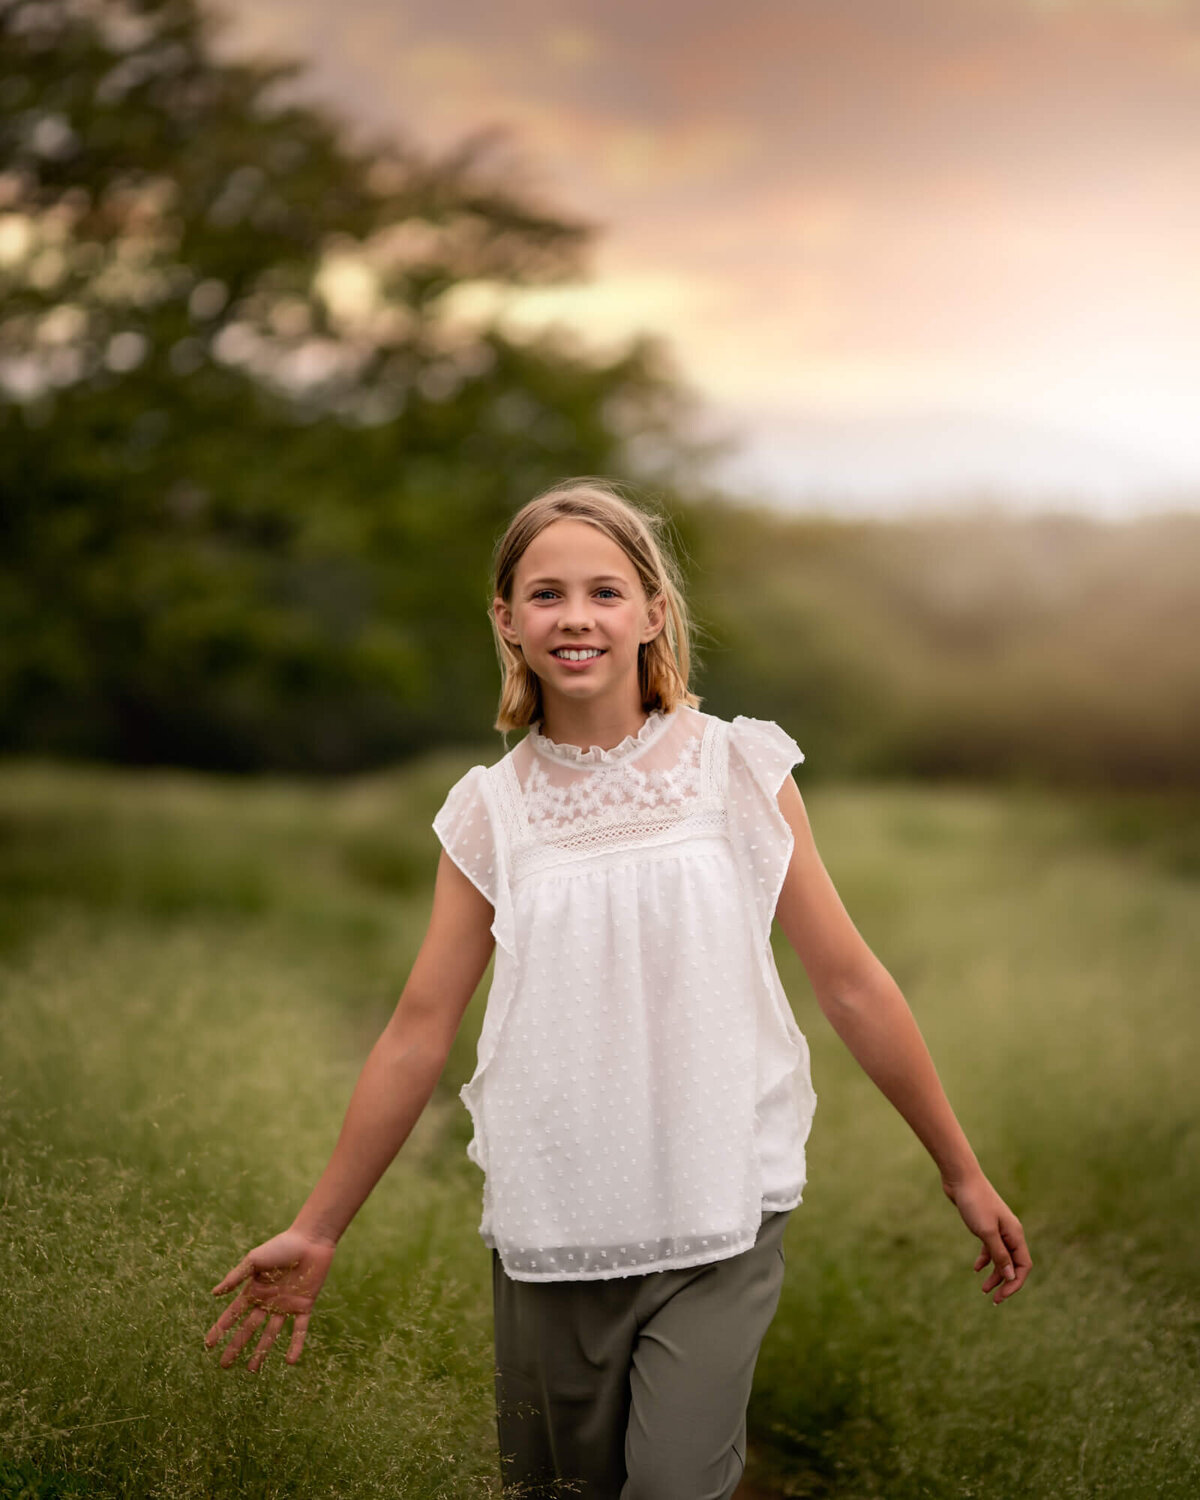 A young girl in a white shirt walking through a trail in tall grass and touching it with her hands